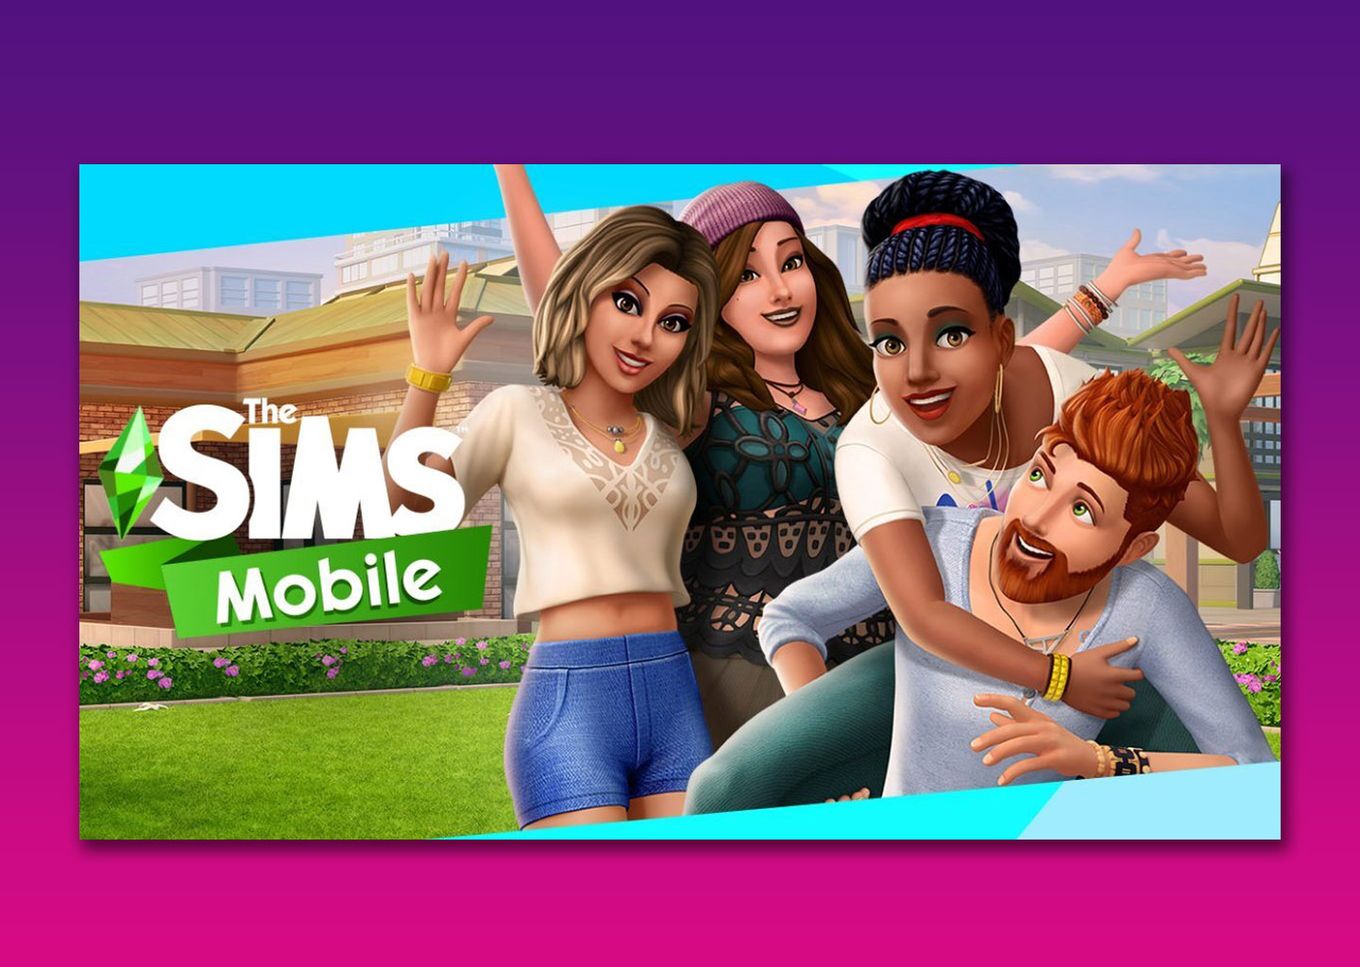 The Sims Mobile - Game For Apple Pencil